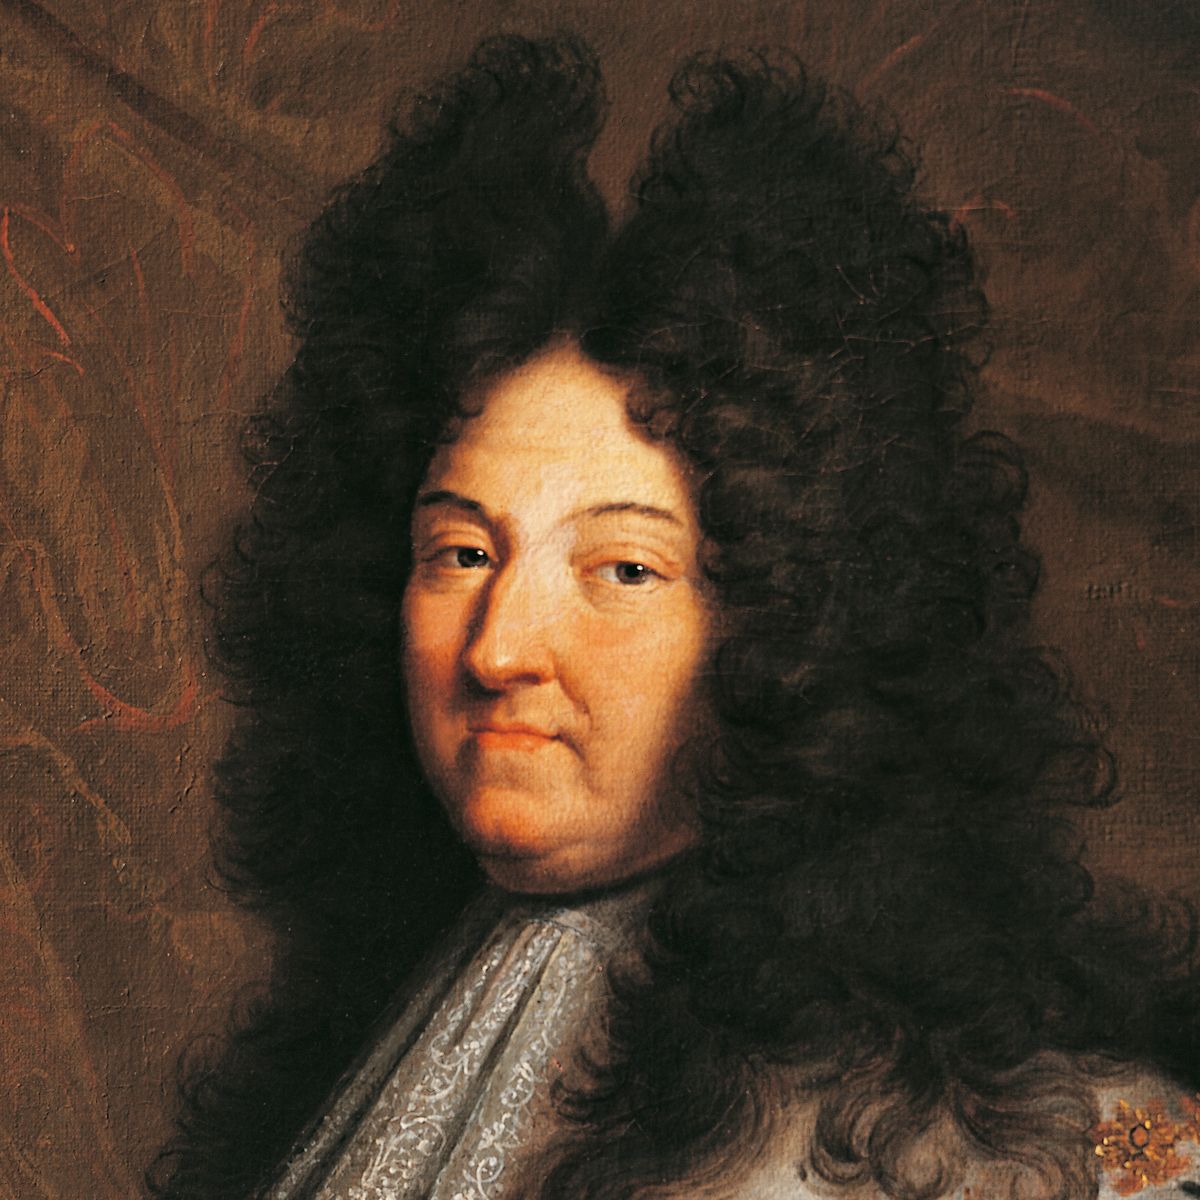 Why is King Louis XIV of France often considered the greatest